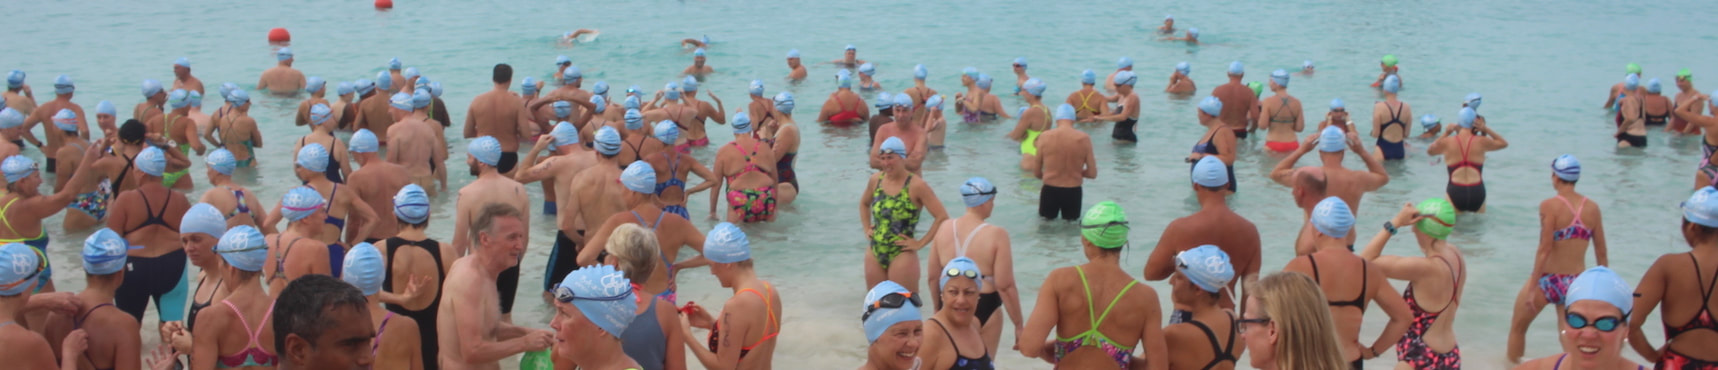 Swimmers gather at 2018 Barbados Open Water Festival